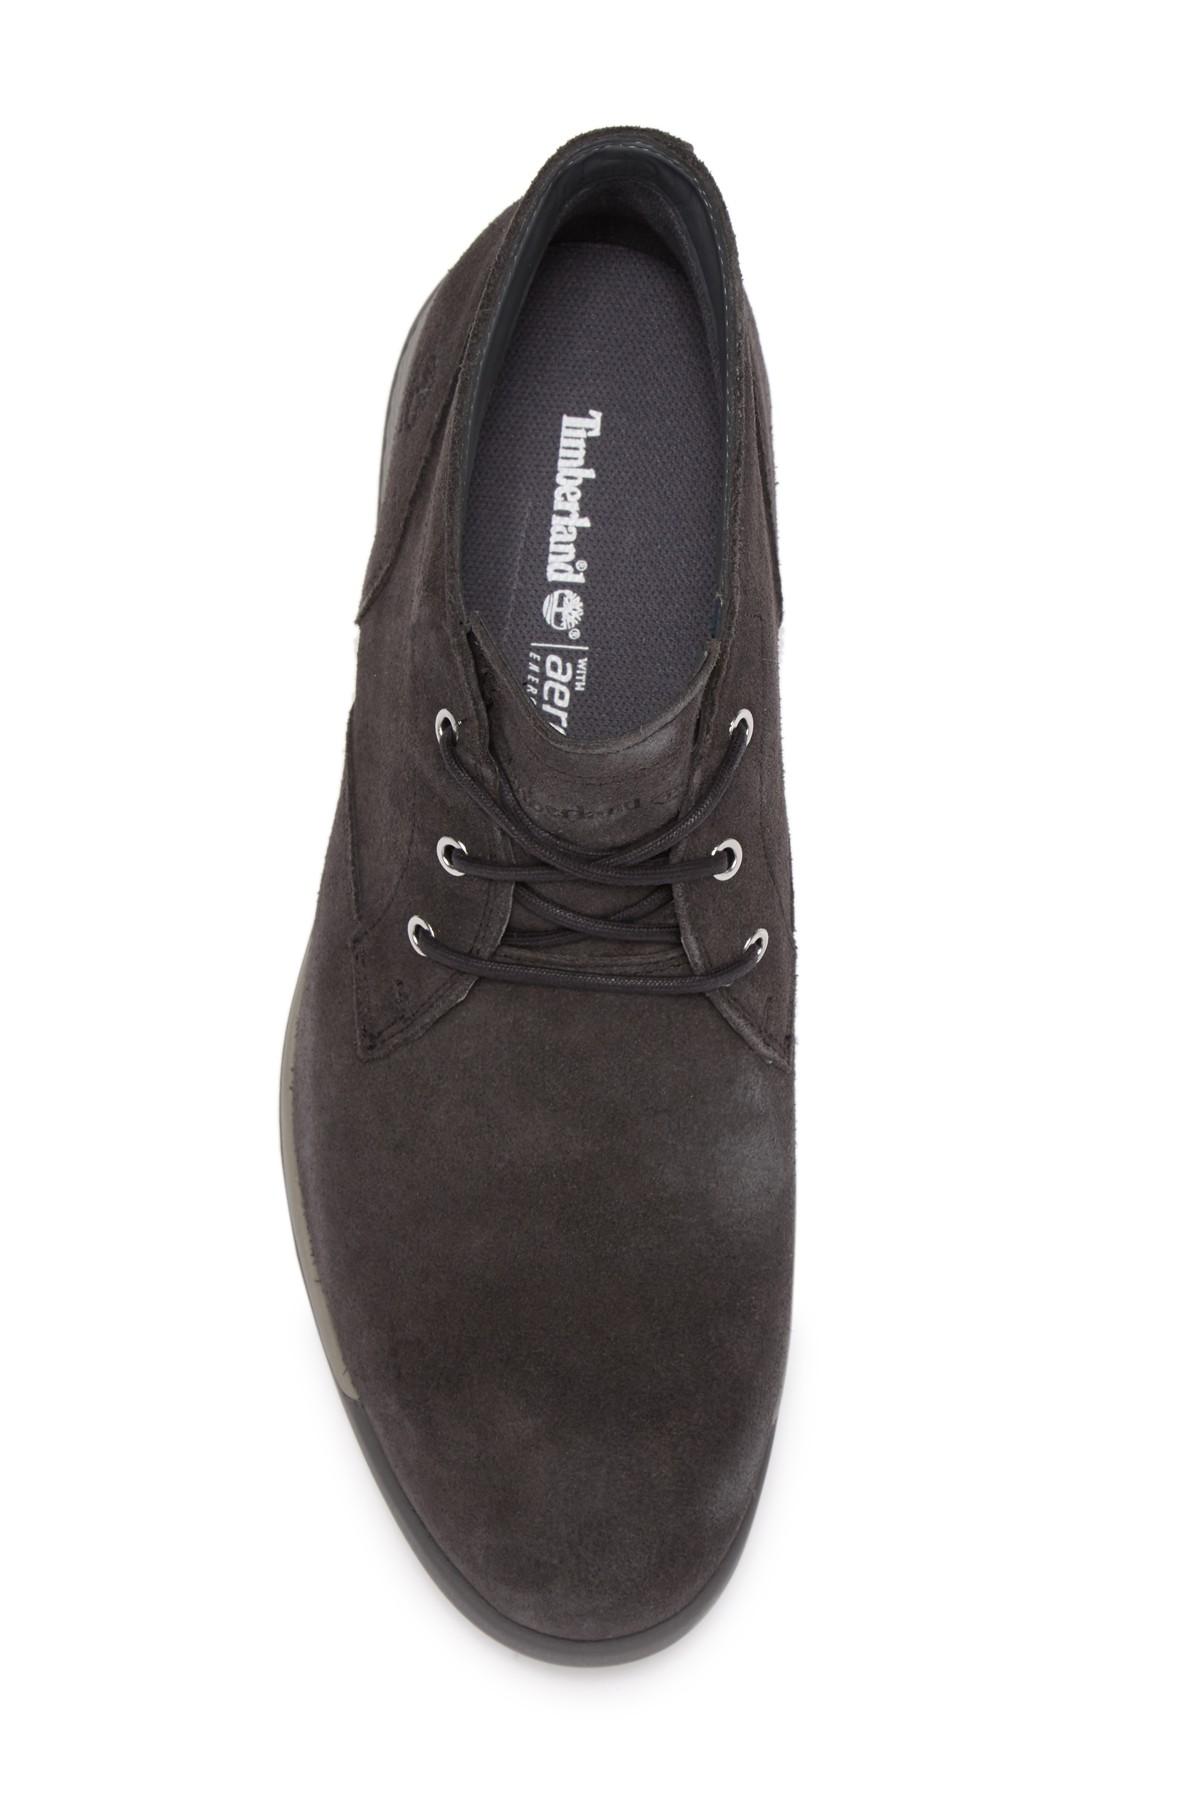 Timberland City's Edge Waterproof Suede Chukka Boot for Men - Lyst